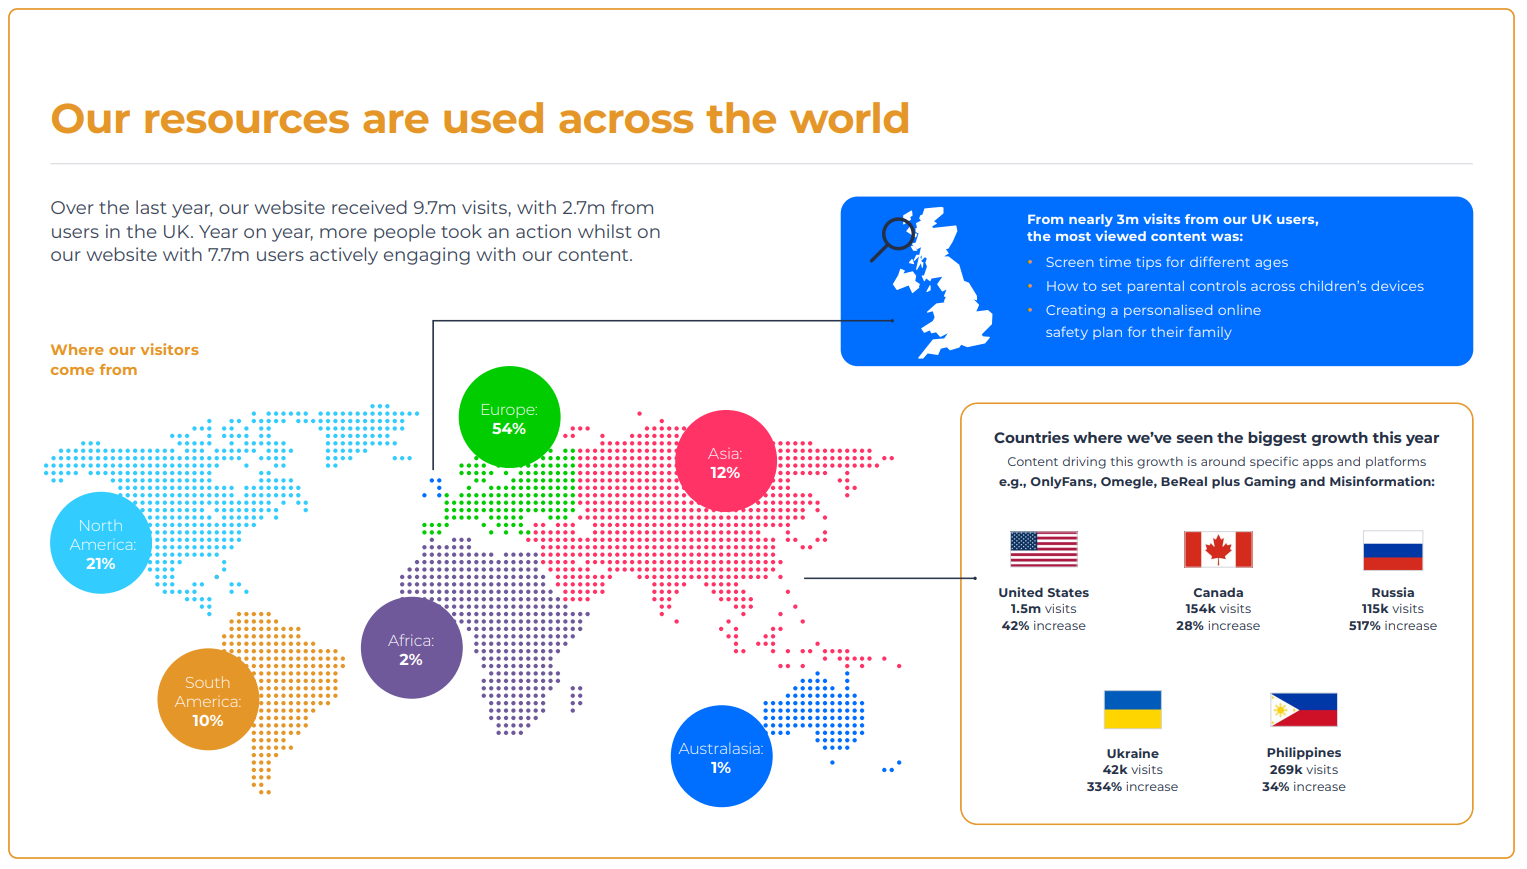 Image from the Impact Report that shows percentage of use across the world.